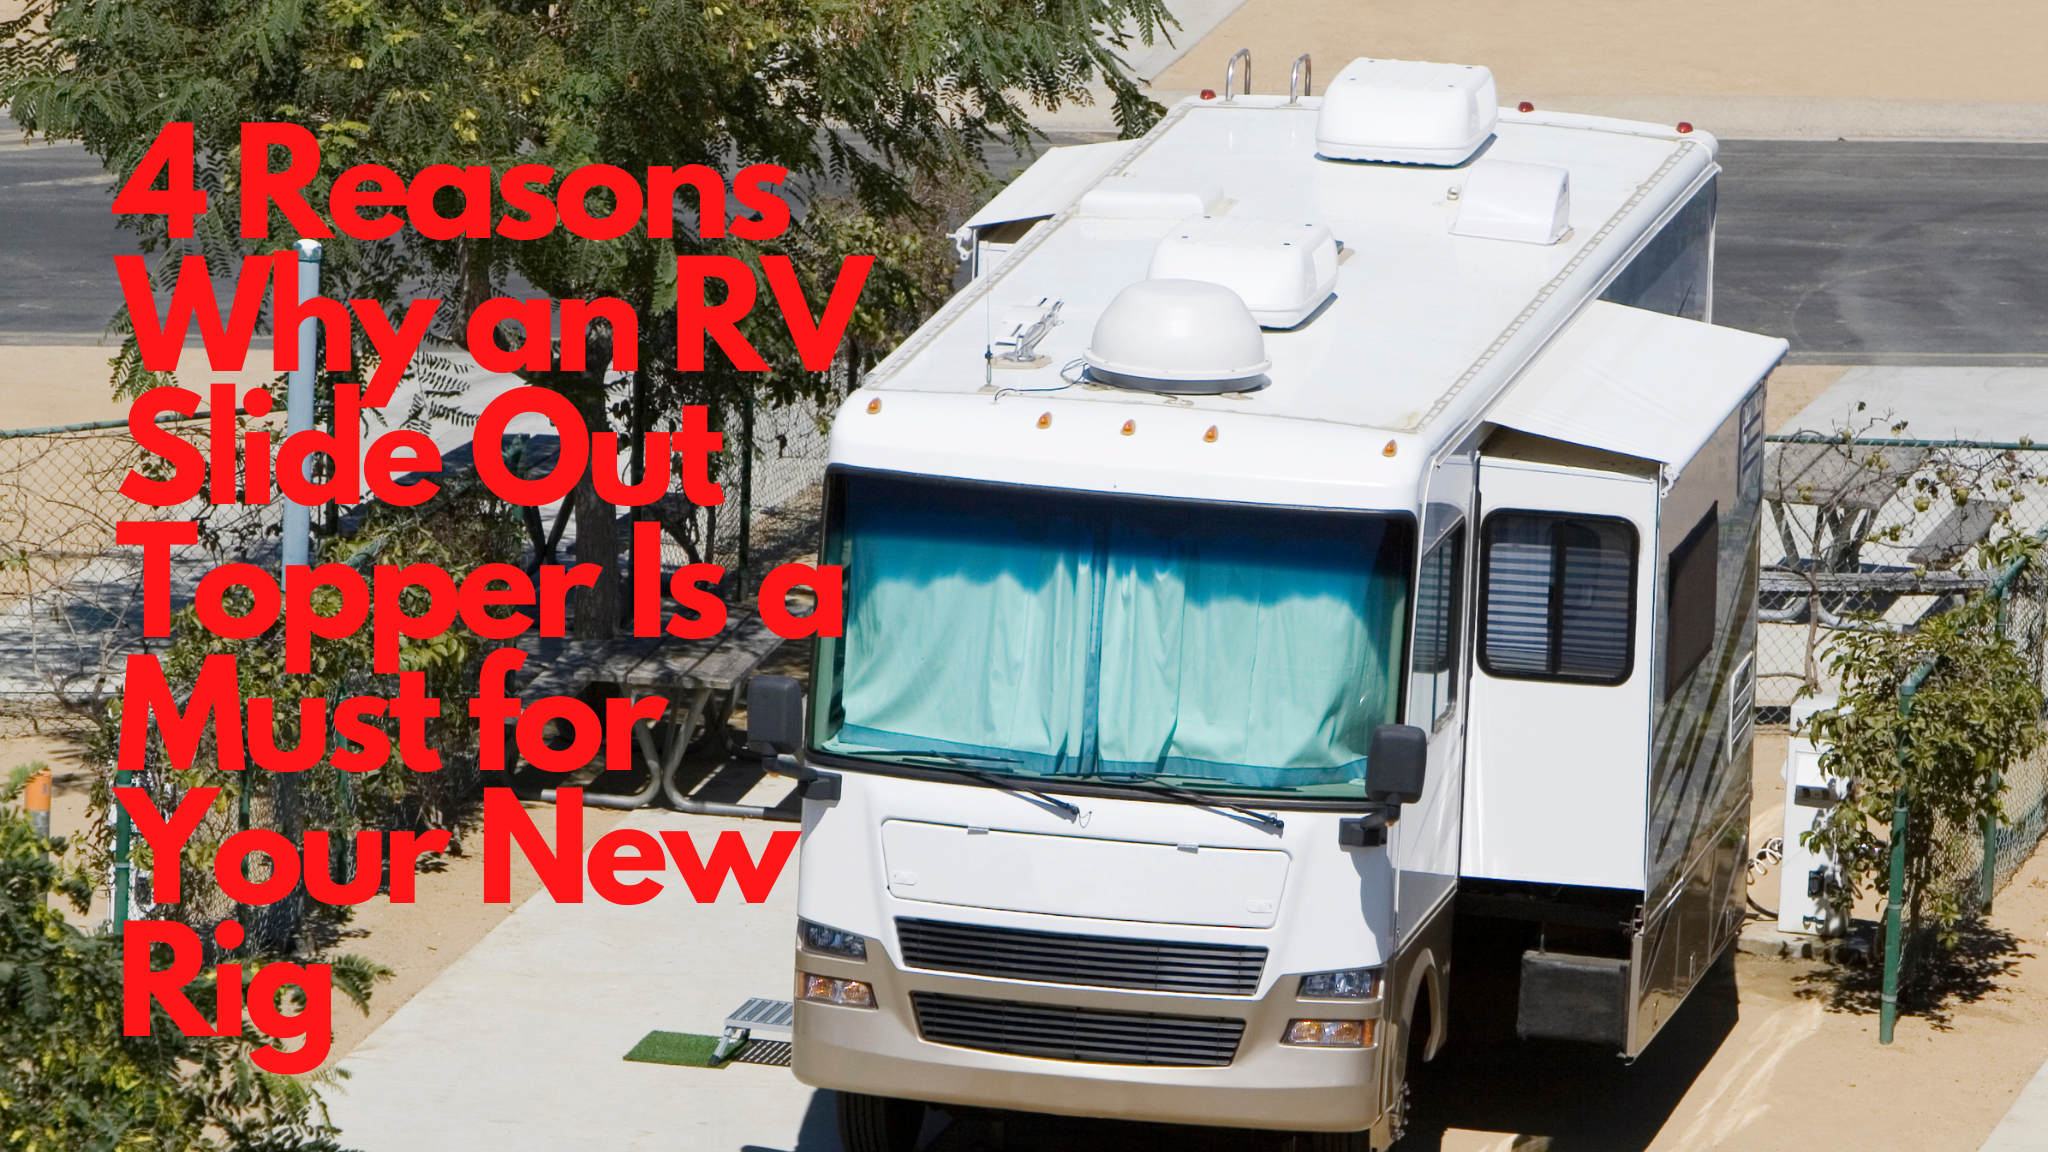 4 Reasons Why an RV Slide Out Topper Is a Must for Your New Rig